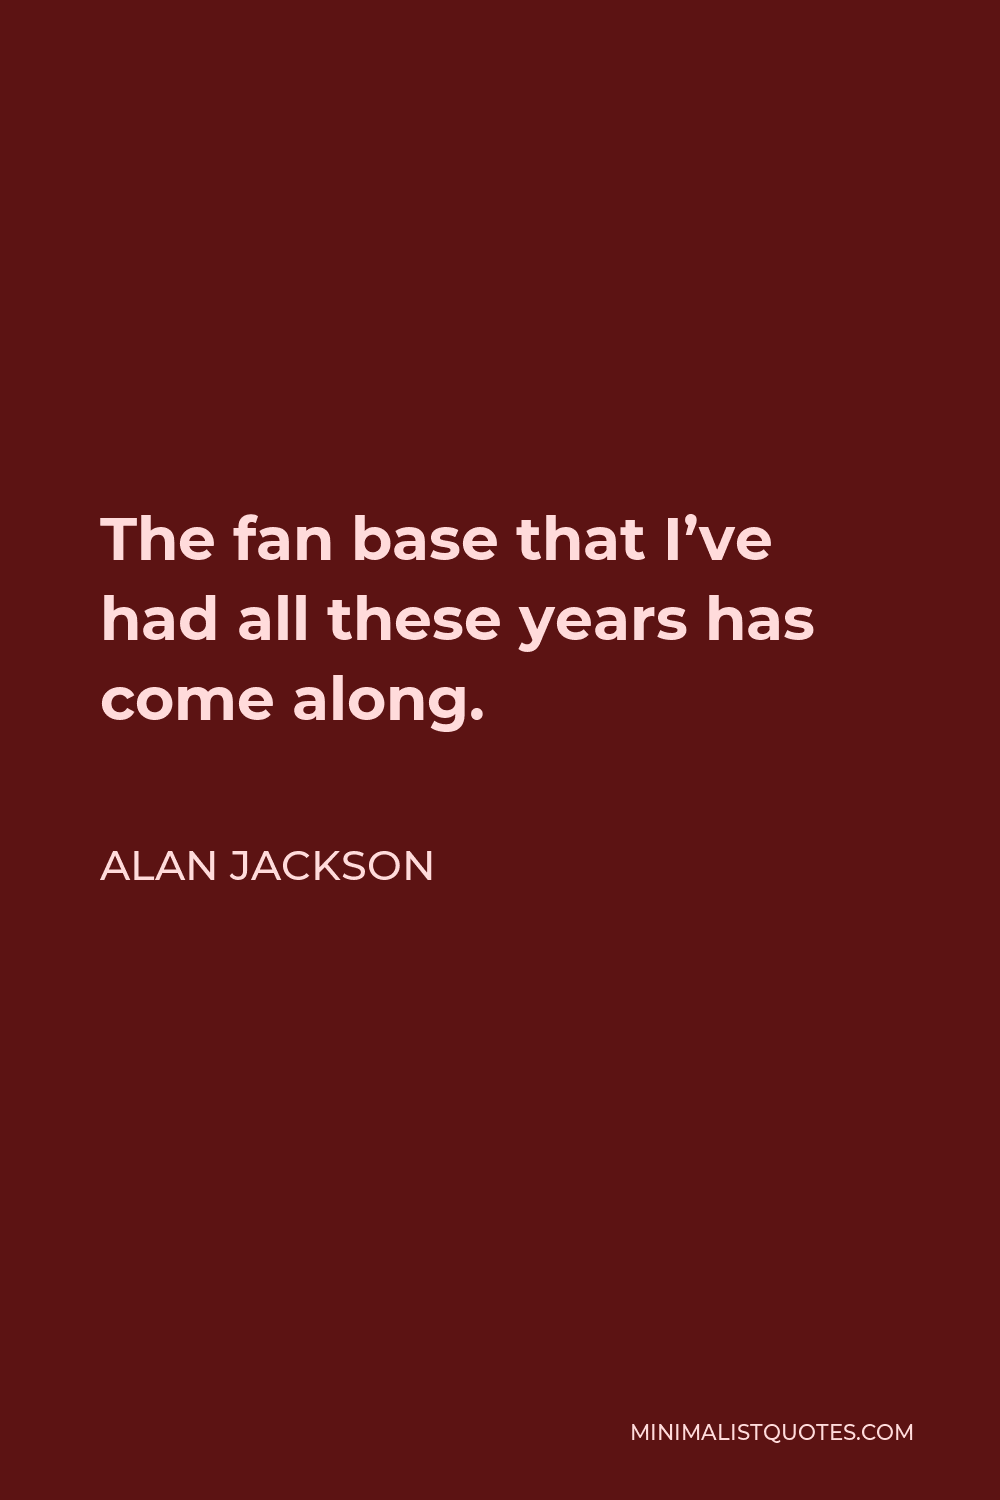 Alan Jackson Quote - The fan base that I’ve had all these years has come along.